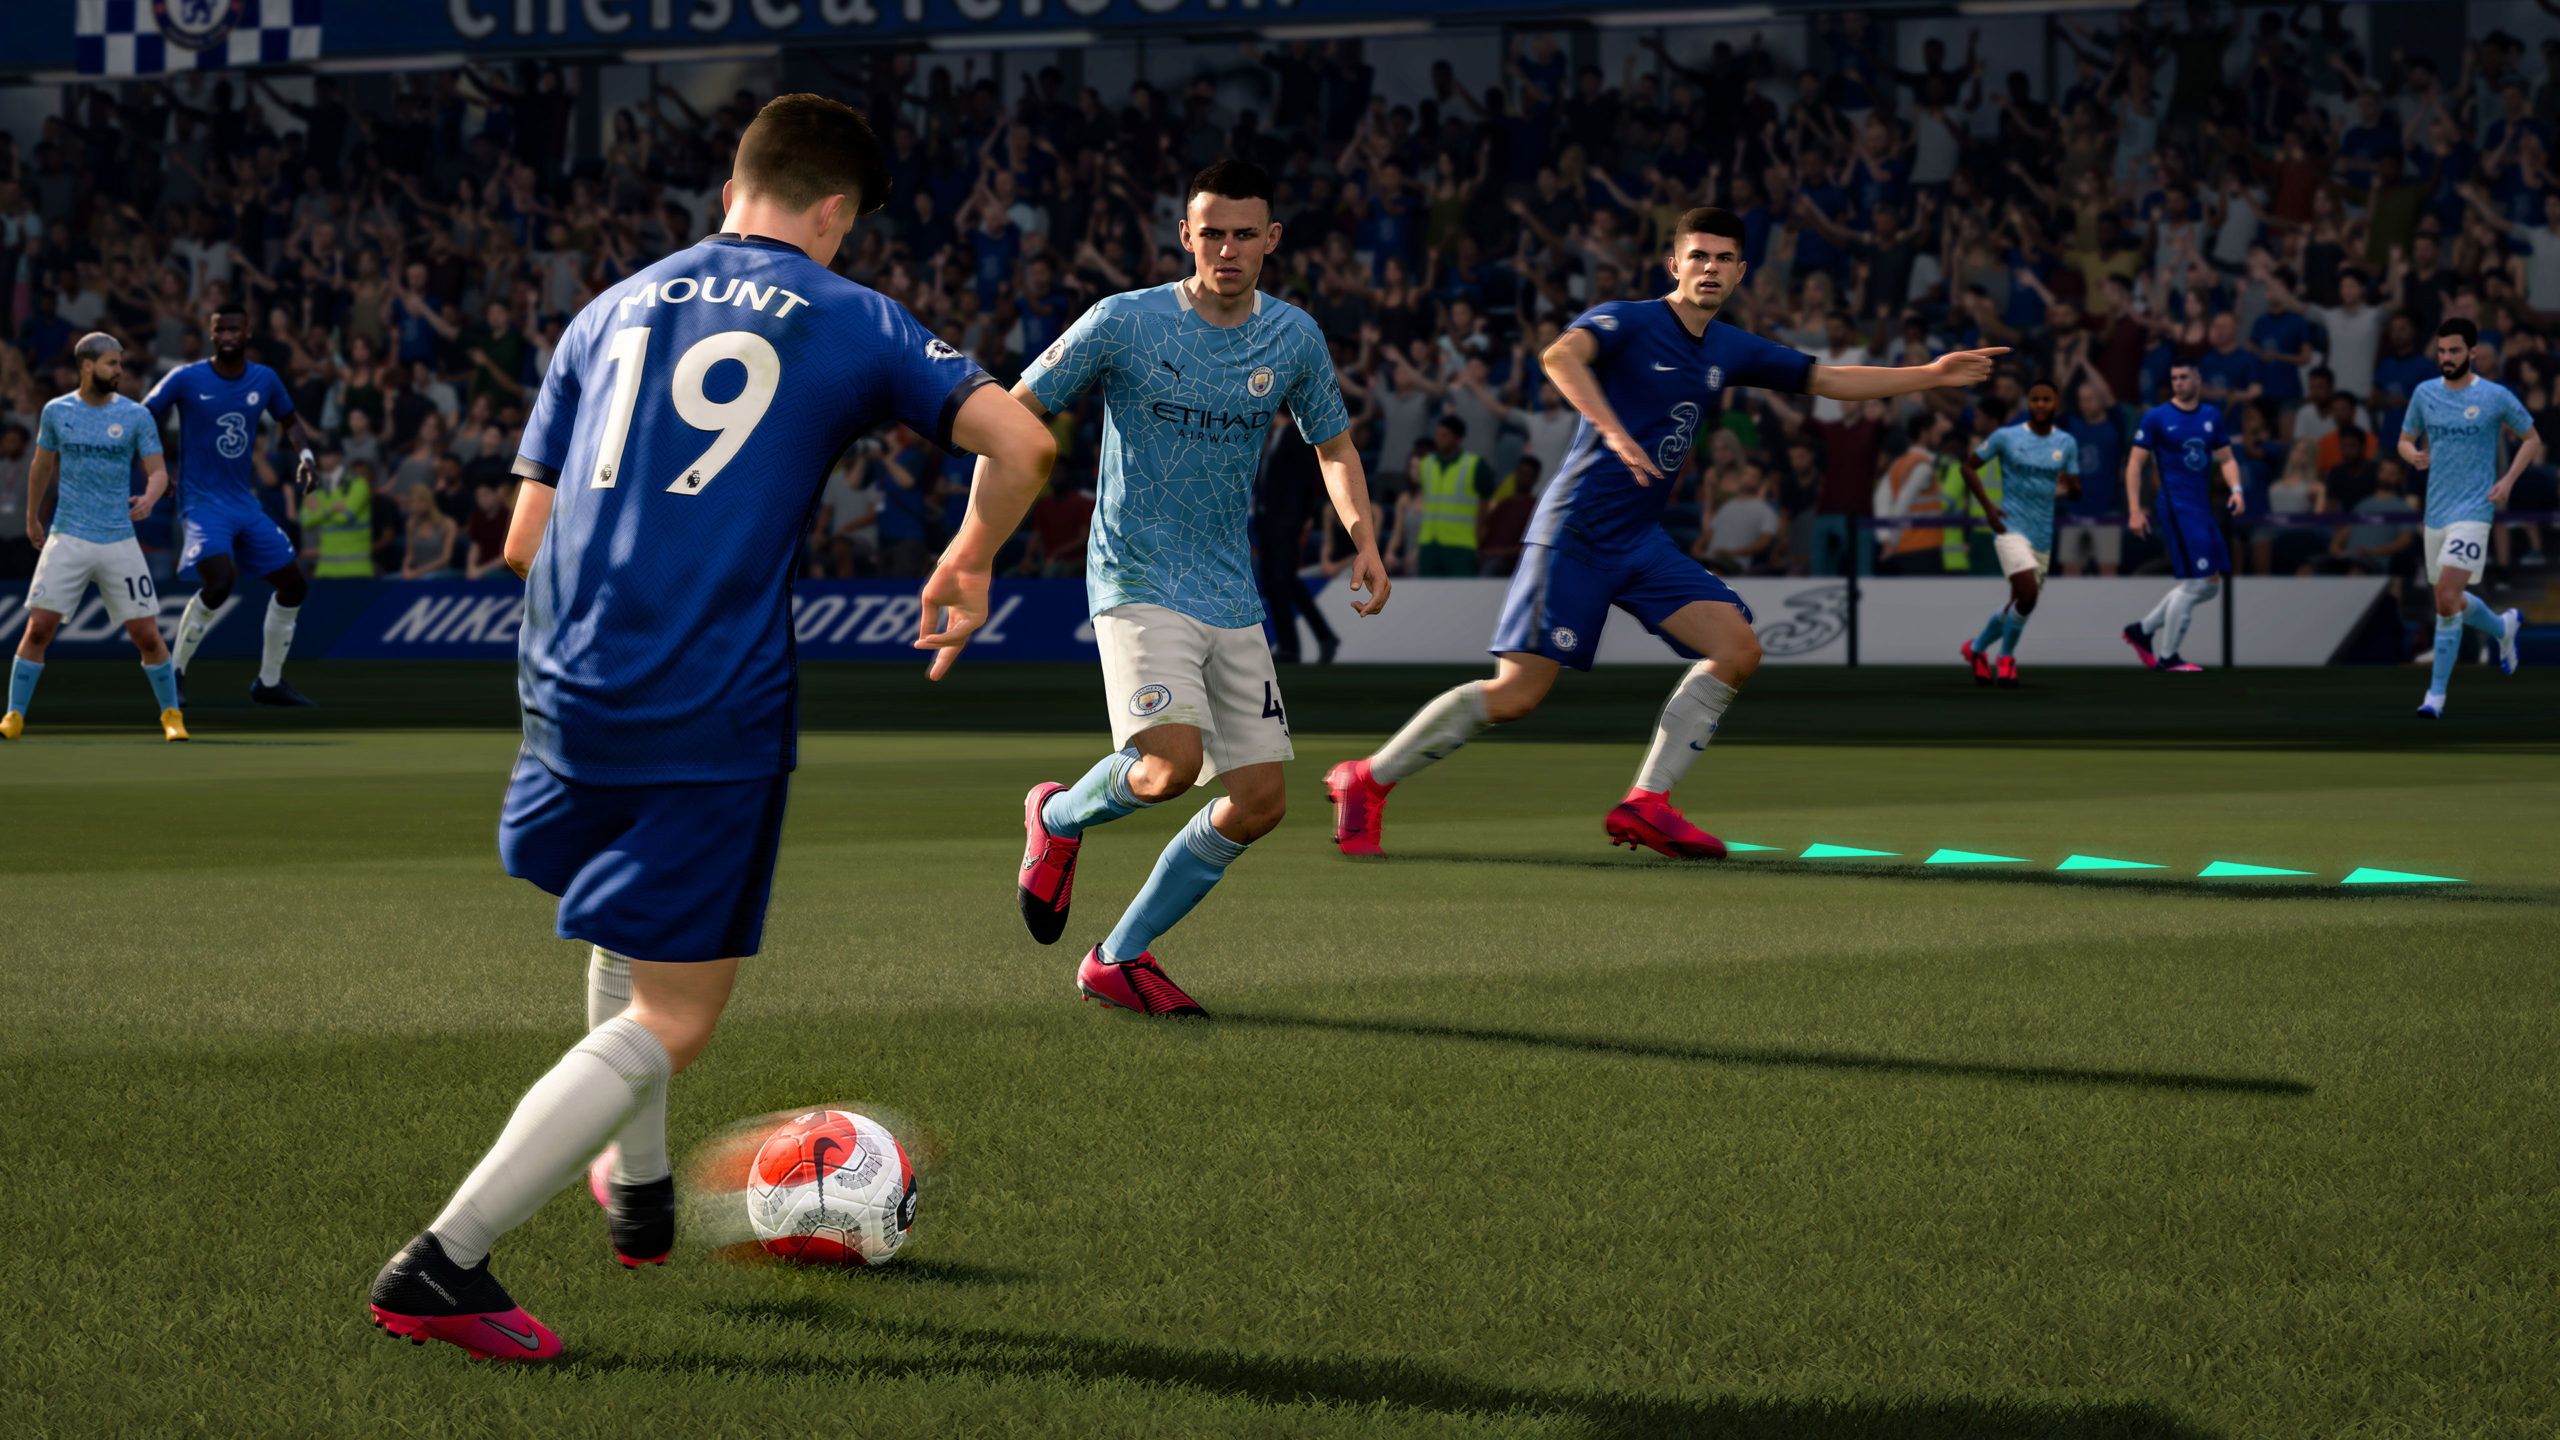 FIFA 21 Won't Support Cross Platform Play, Even Within Console Families